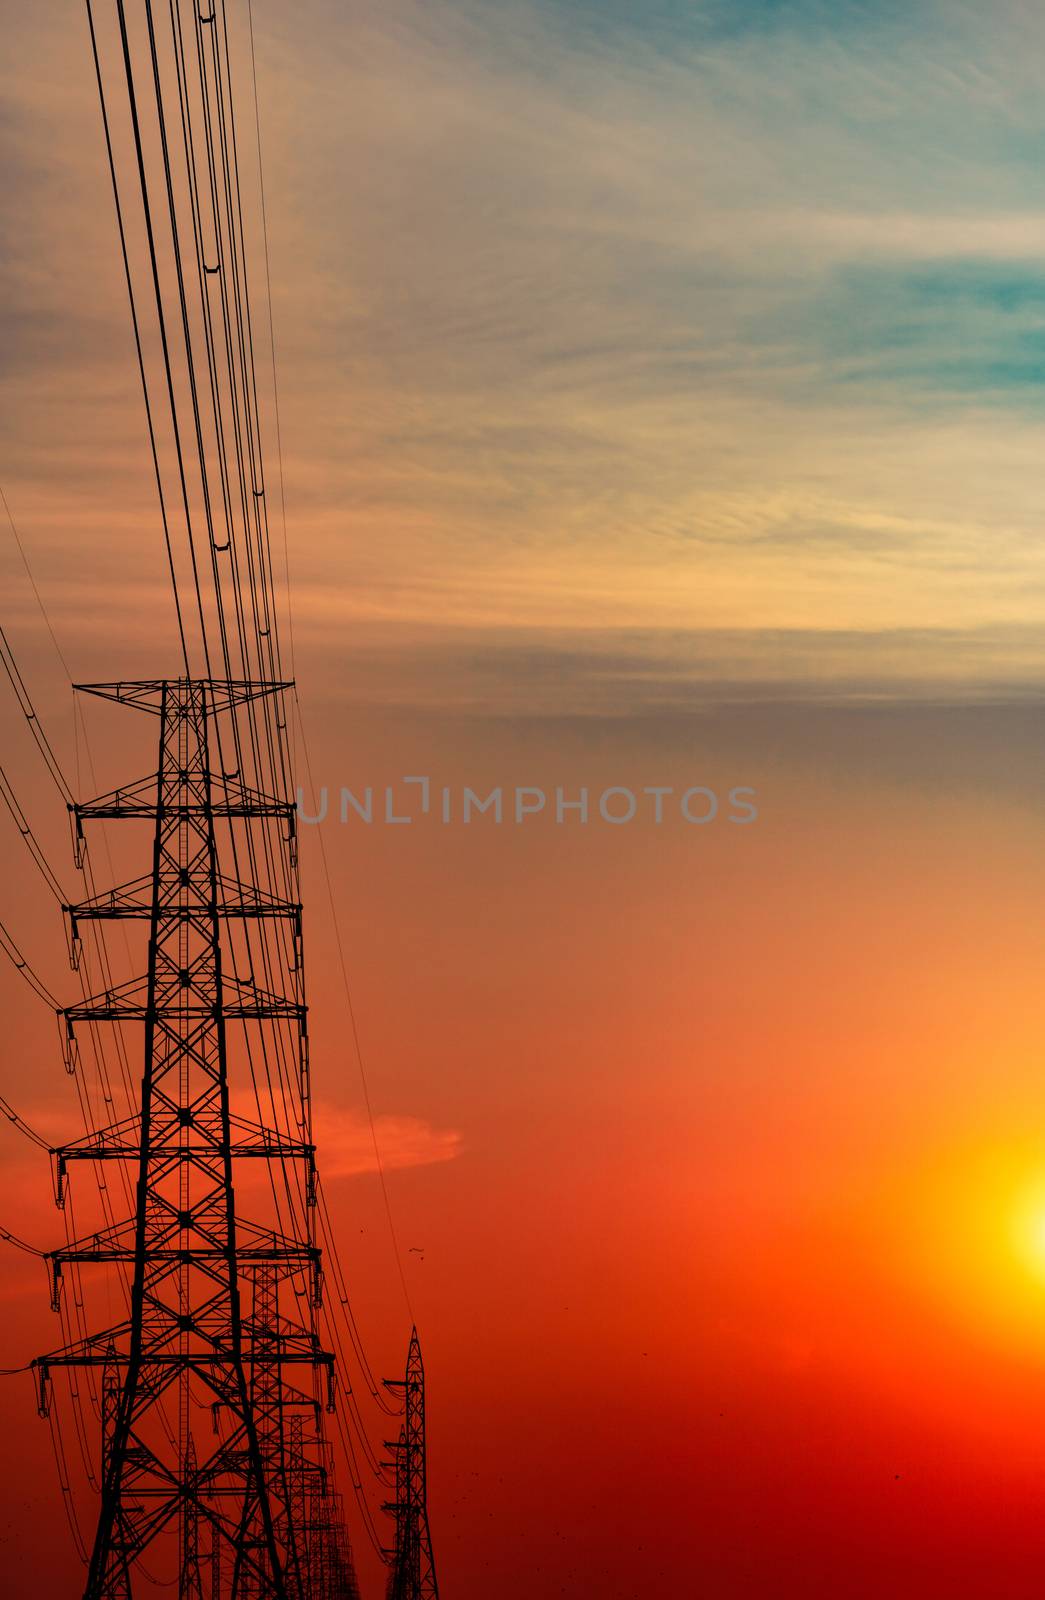 High voltage electric pole and transmission lines in the evening by Fahroni